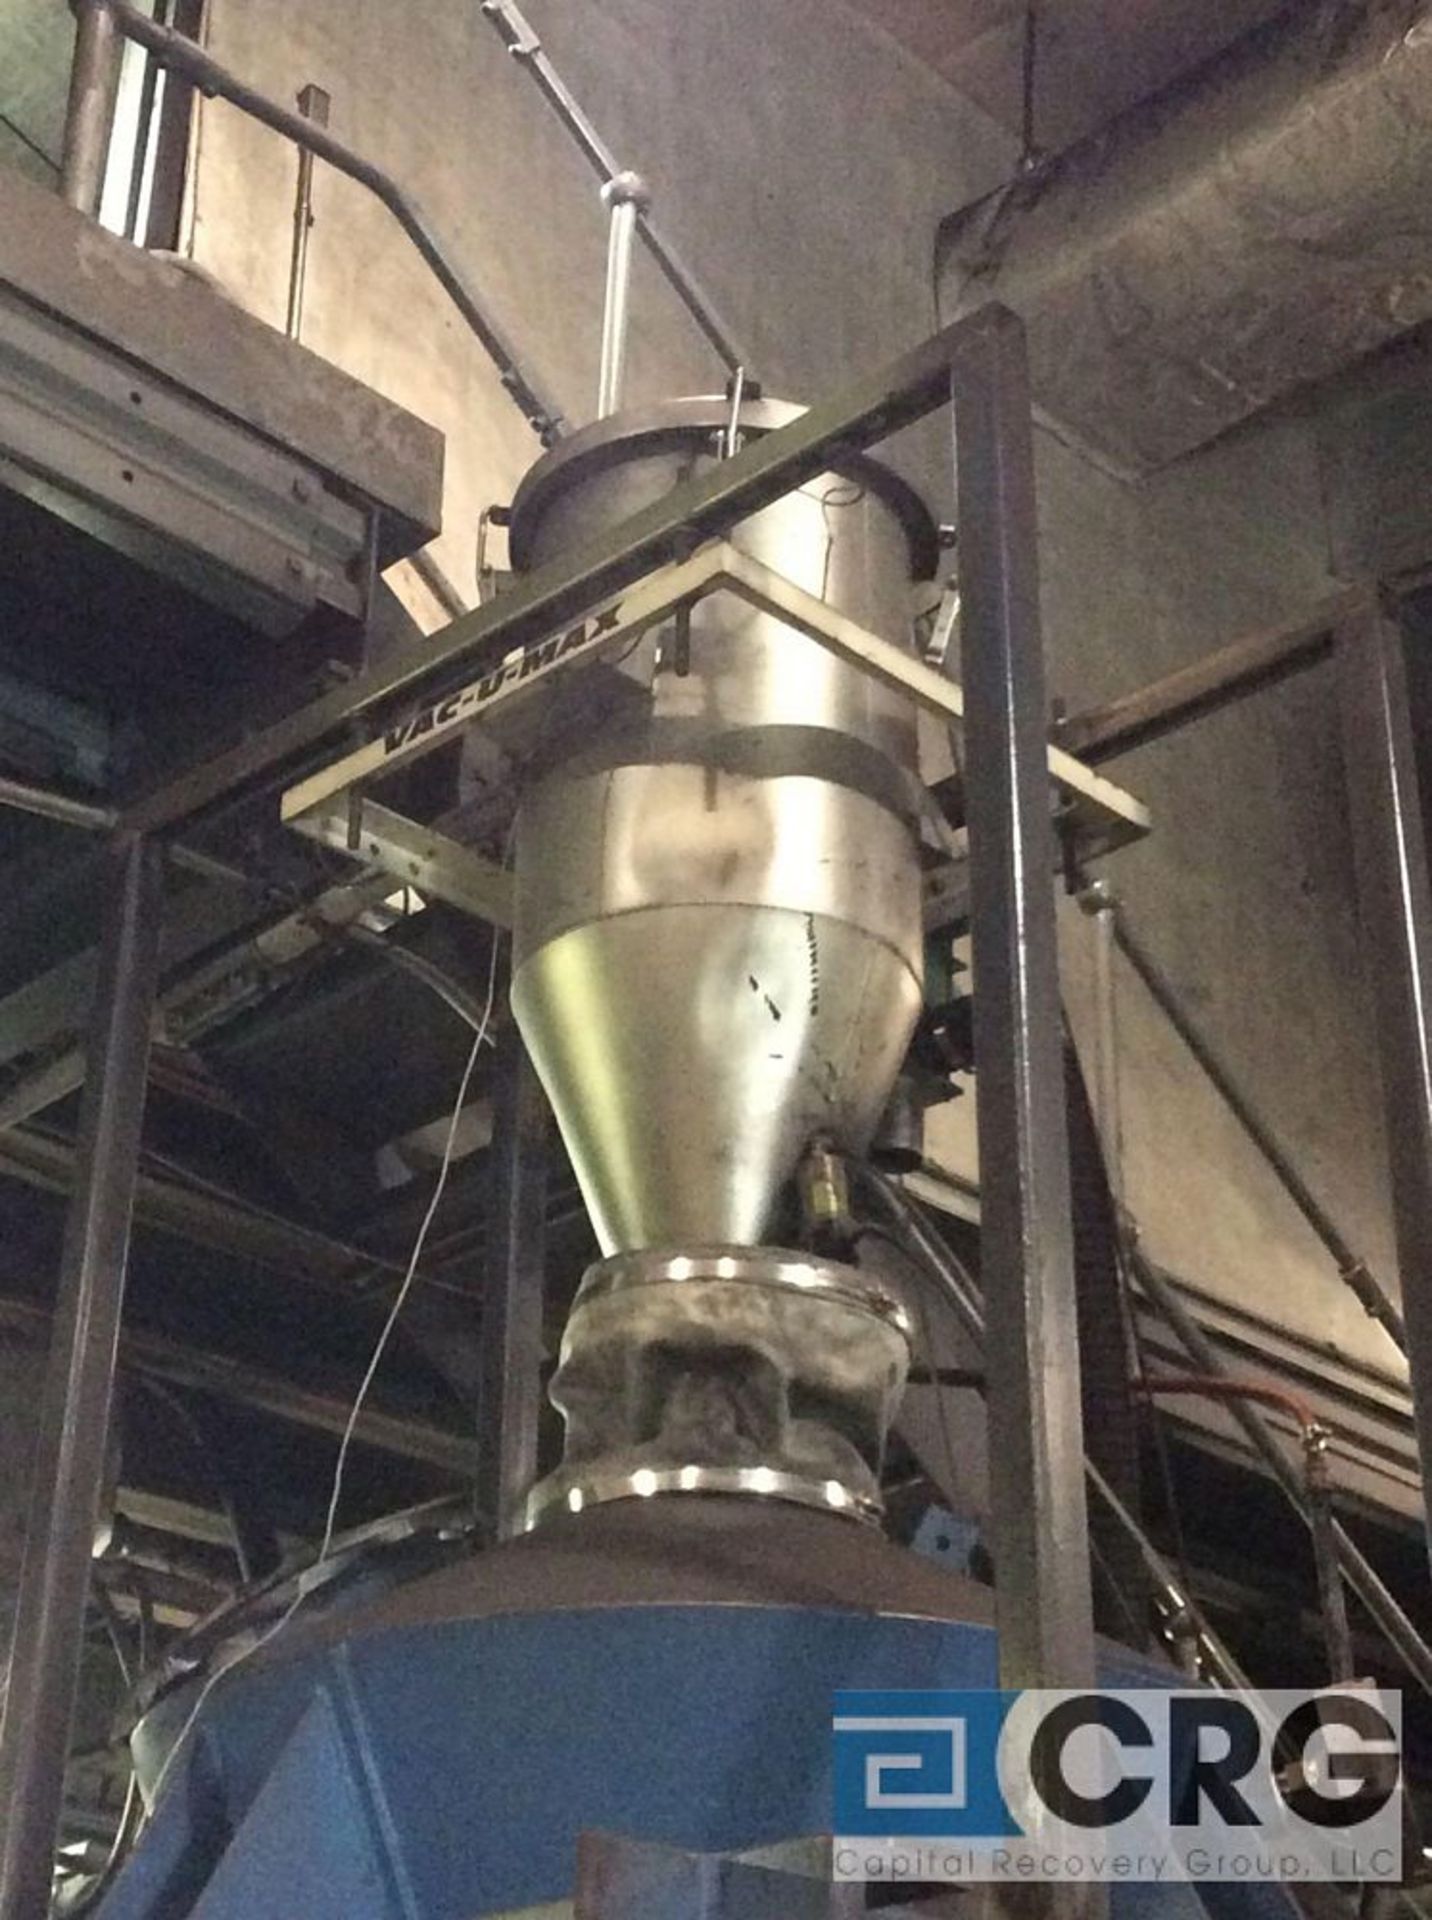 Vac-U-Max bulk product collection system including Vac-U-Max stainless steel conical blower (subject - Image 2 of 4